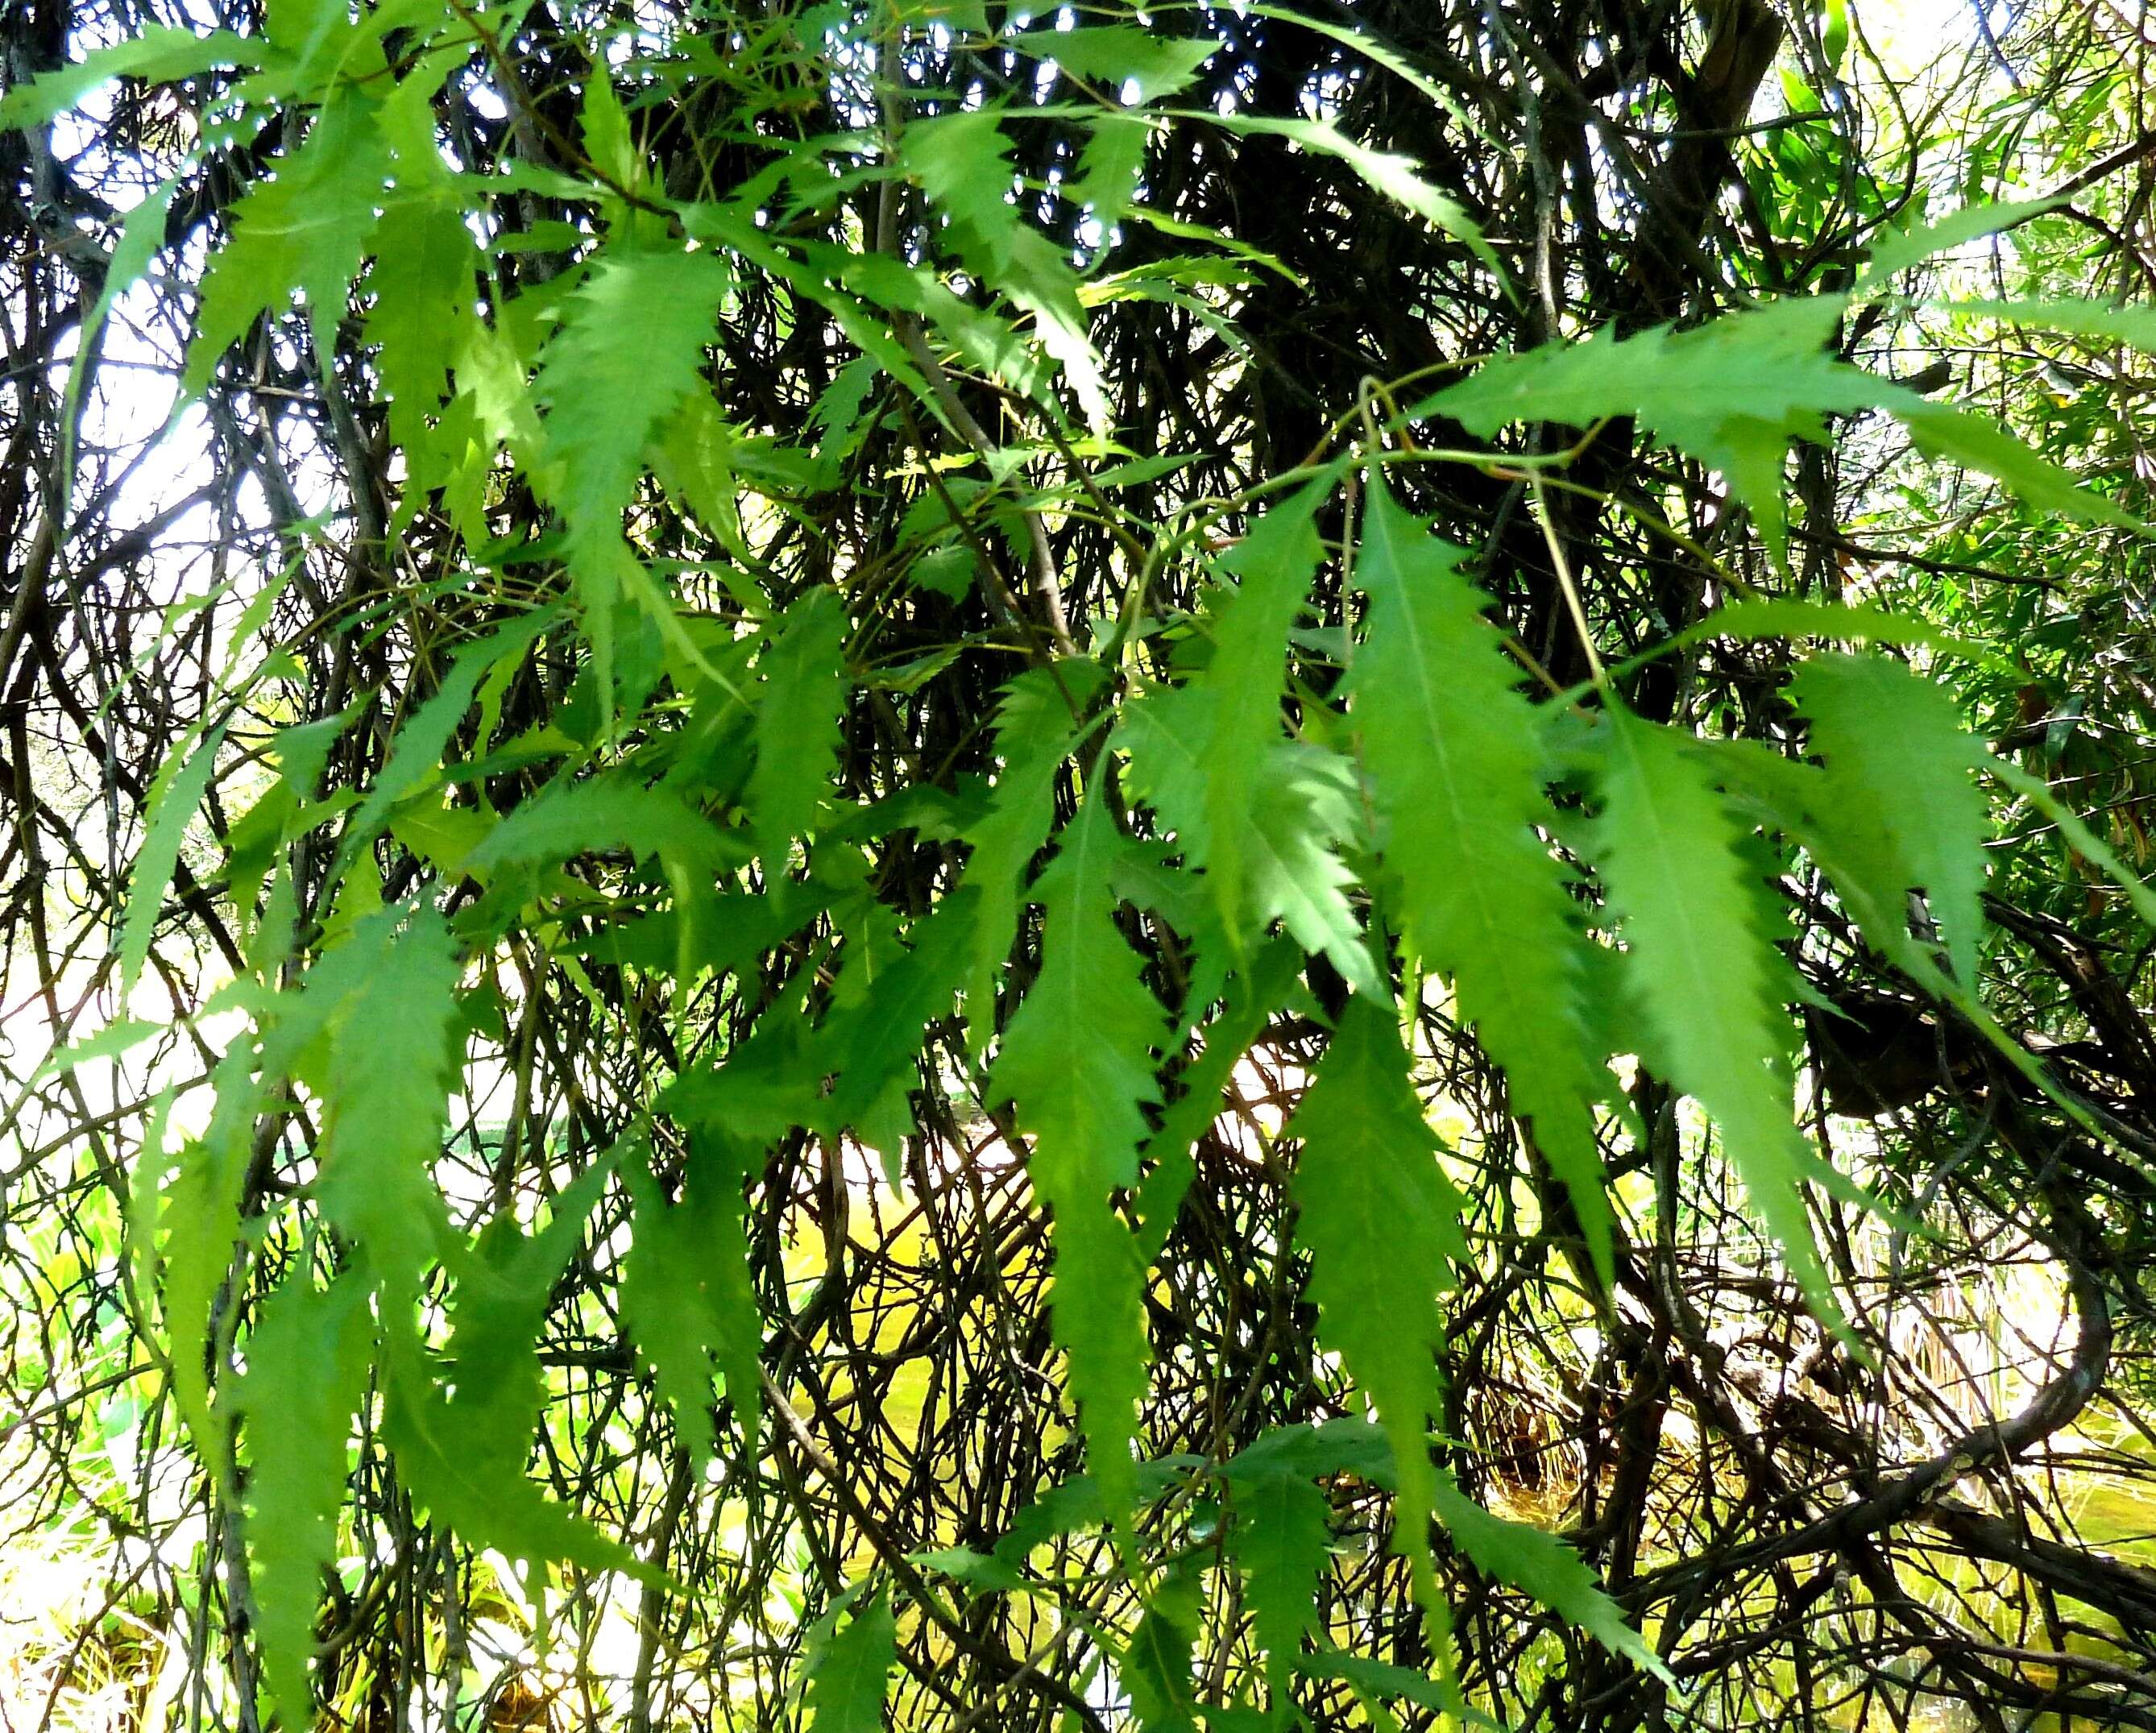 Image of African poison oak